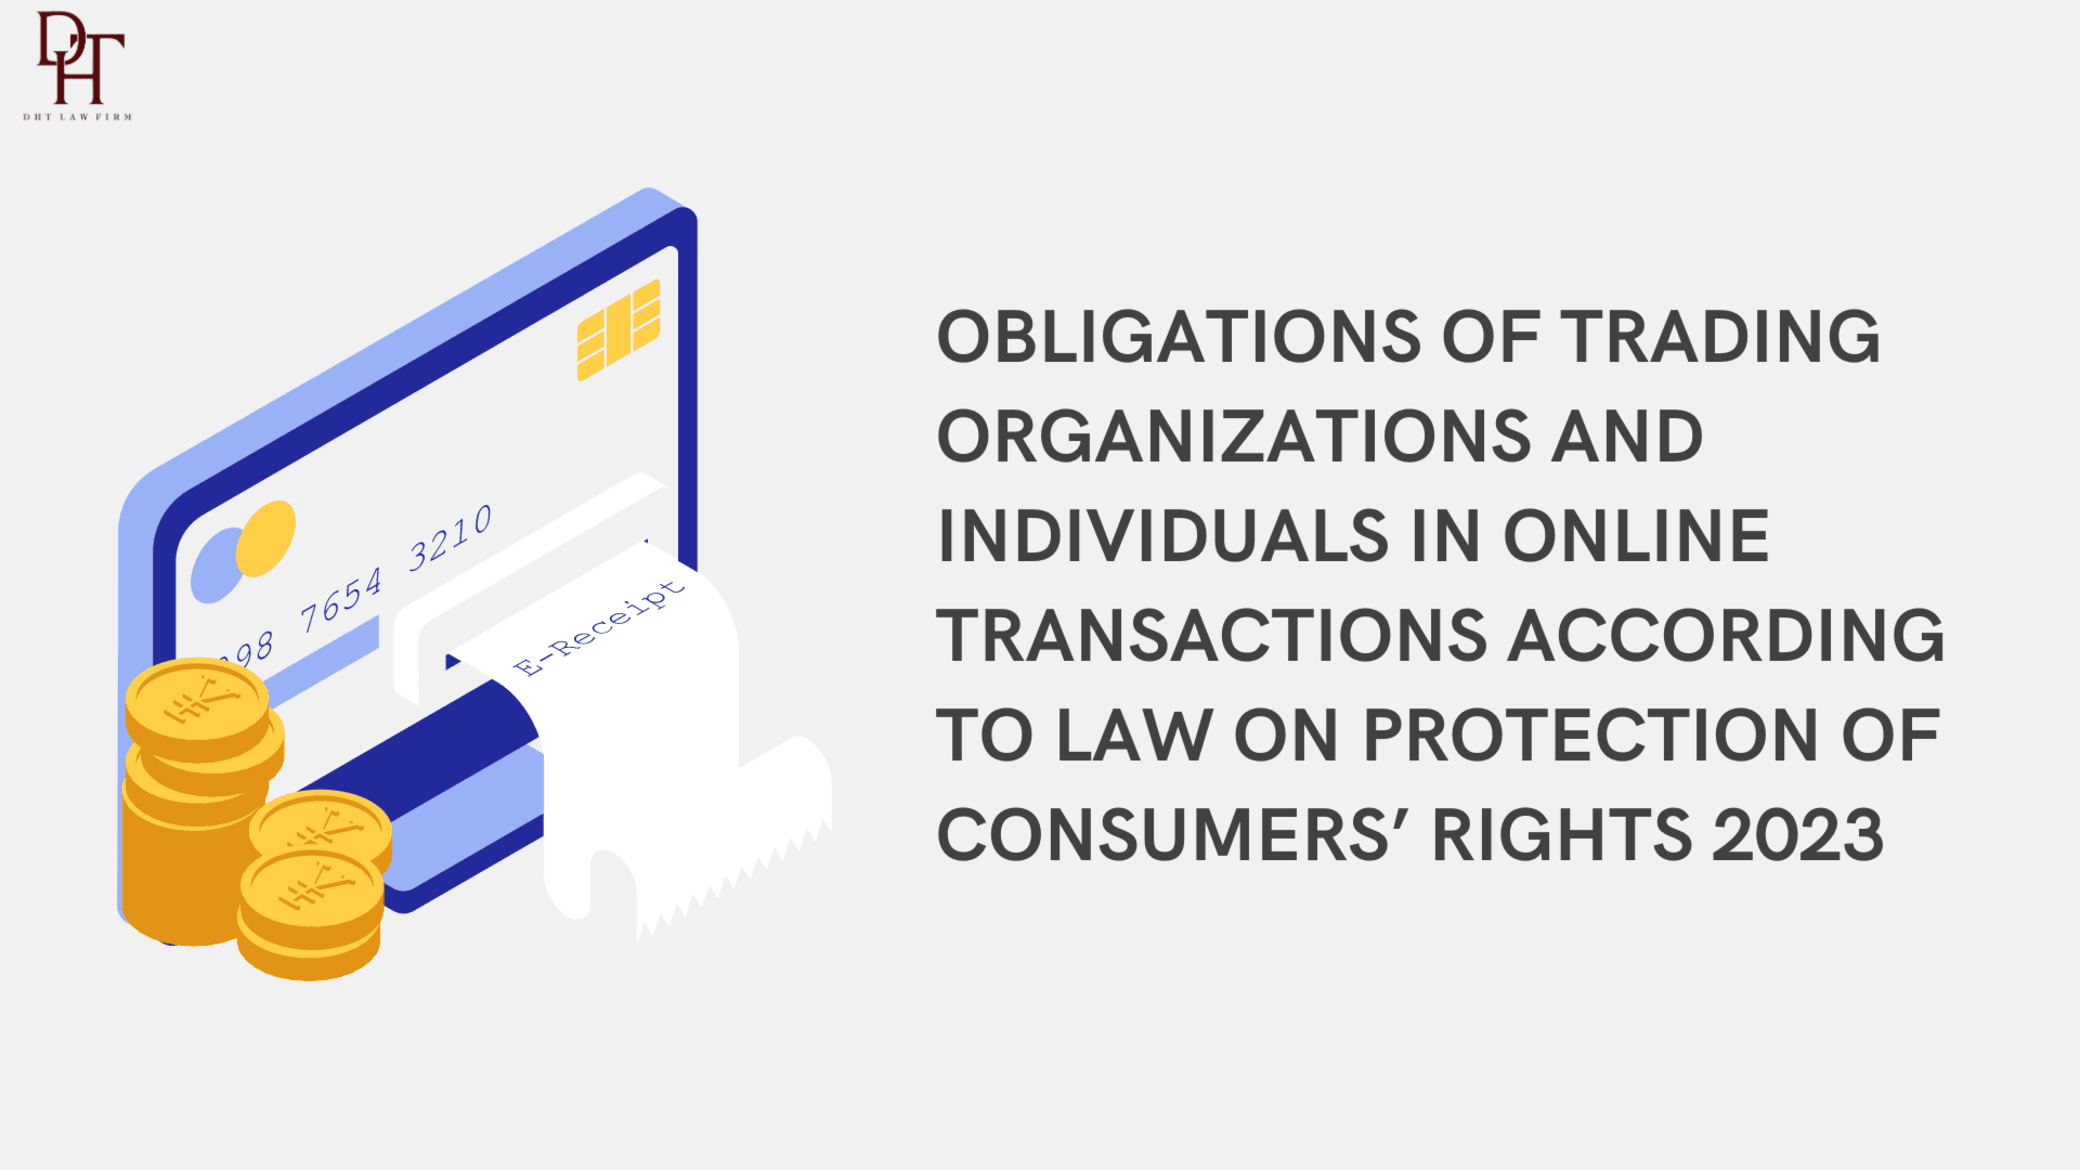 OBLIGATIONS OF TRADING ORGANIZATIONS AND INDIVIDUALS  IN ONLINE TRANSACTIONS ACCORDING TO THE LATEST REGULATIONS OF LAW ON PROTECTION OF CONSUMERS’ RIGHTS 2023